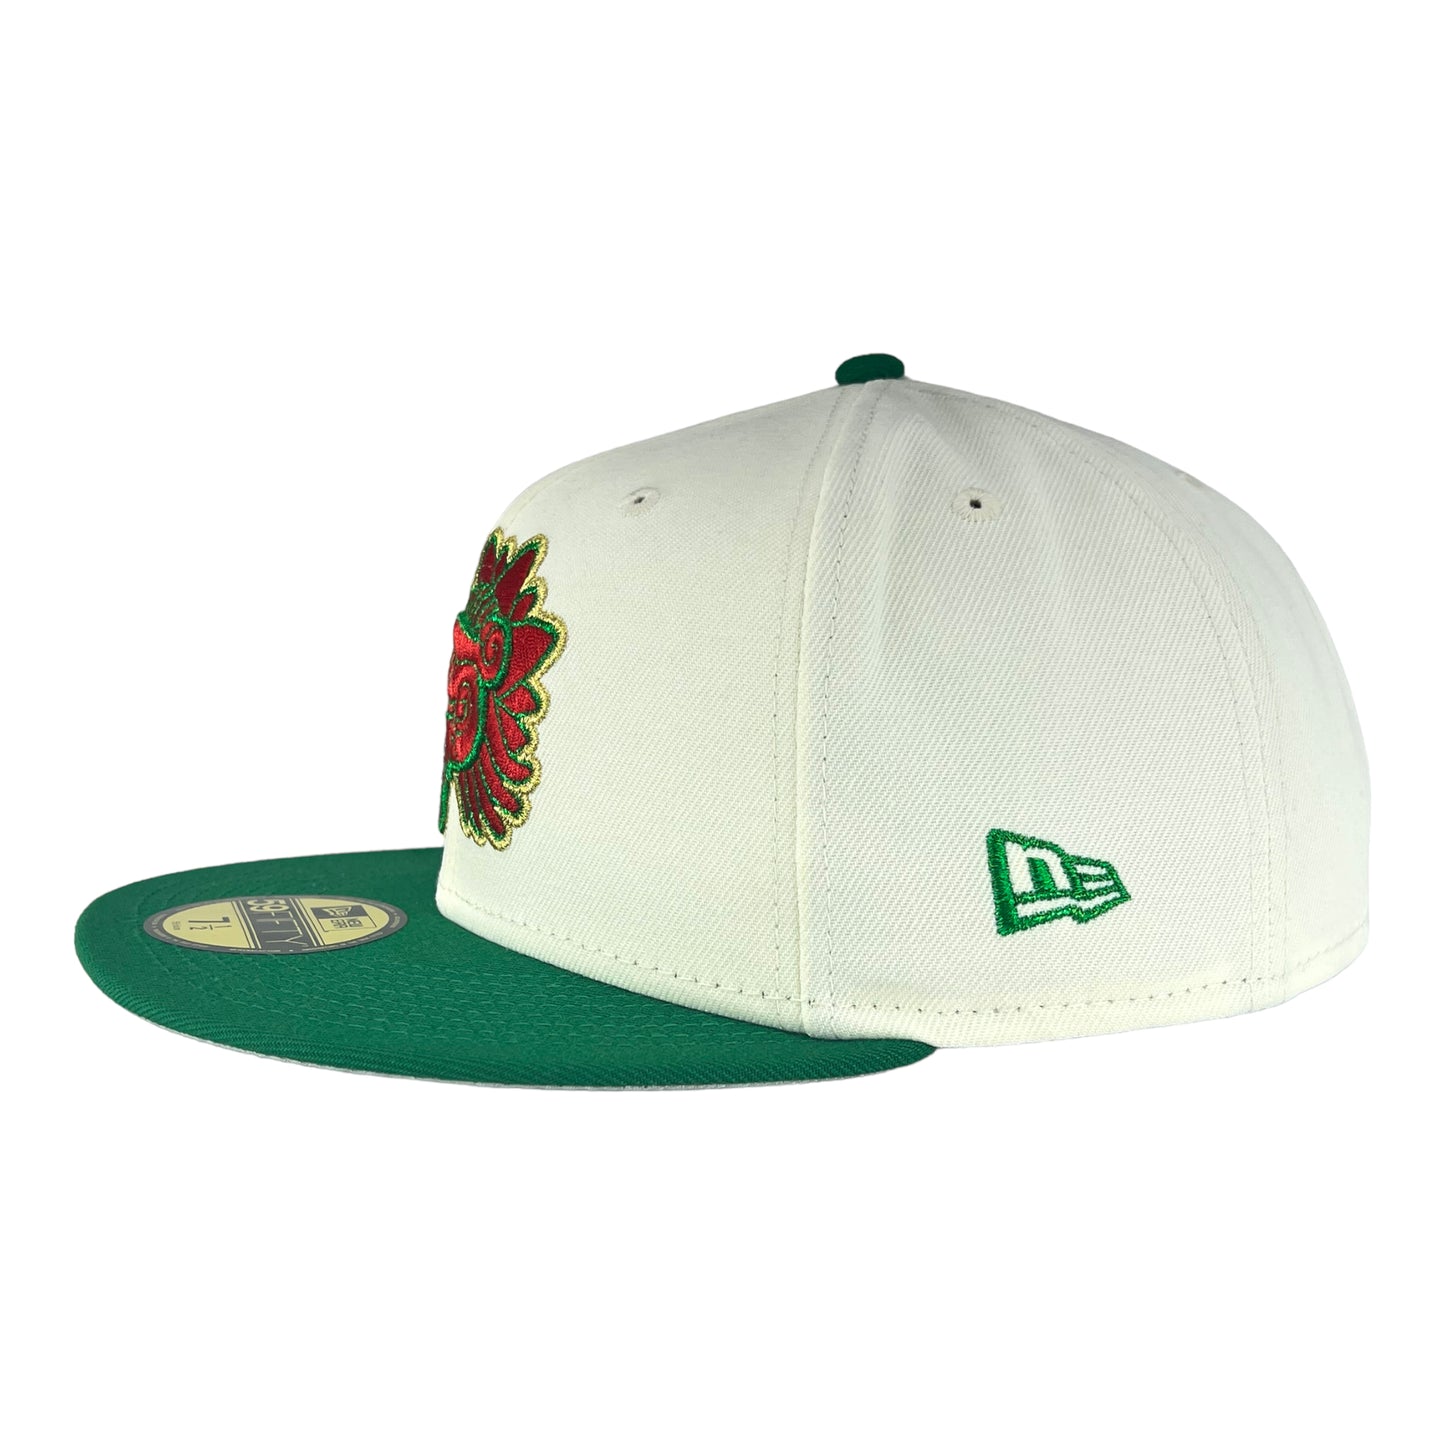 Mexico Quetzalcoatl Chrome New Era 59FIFTY Fitted Hat